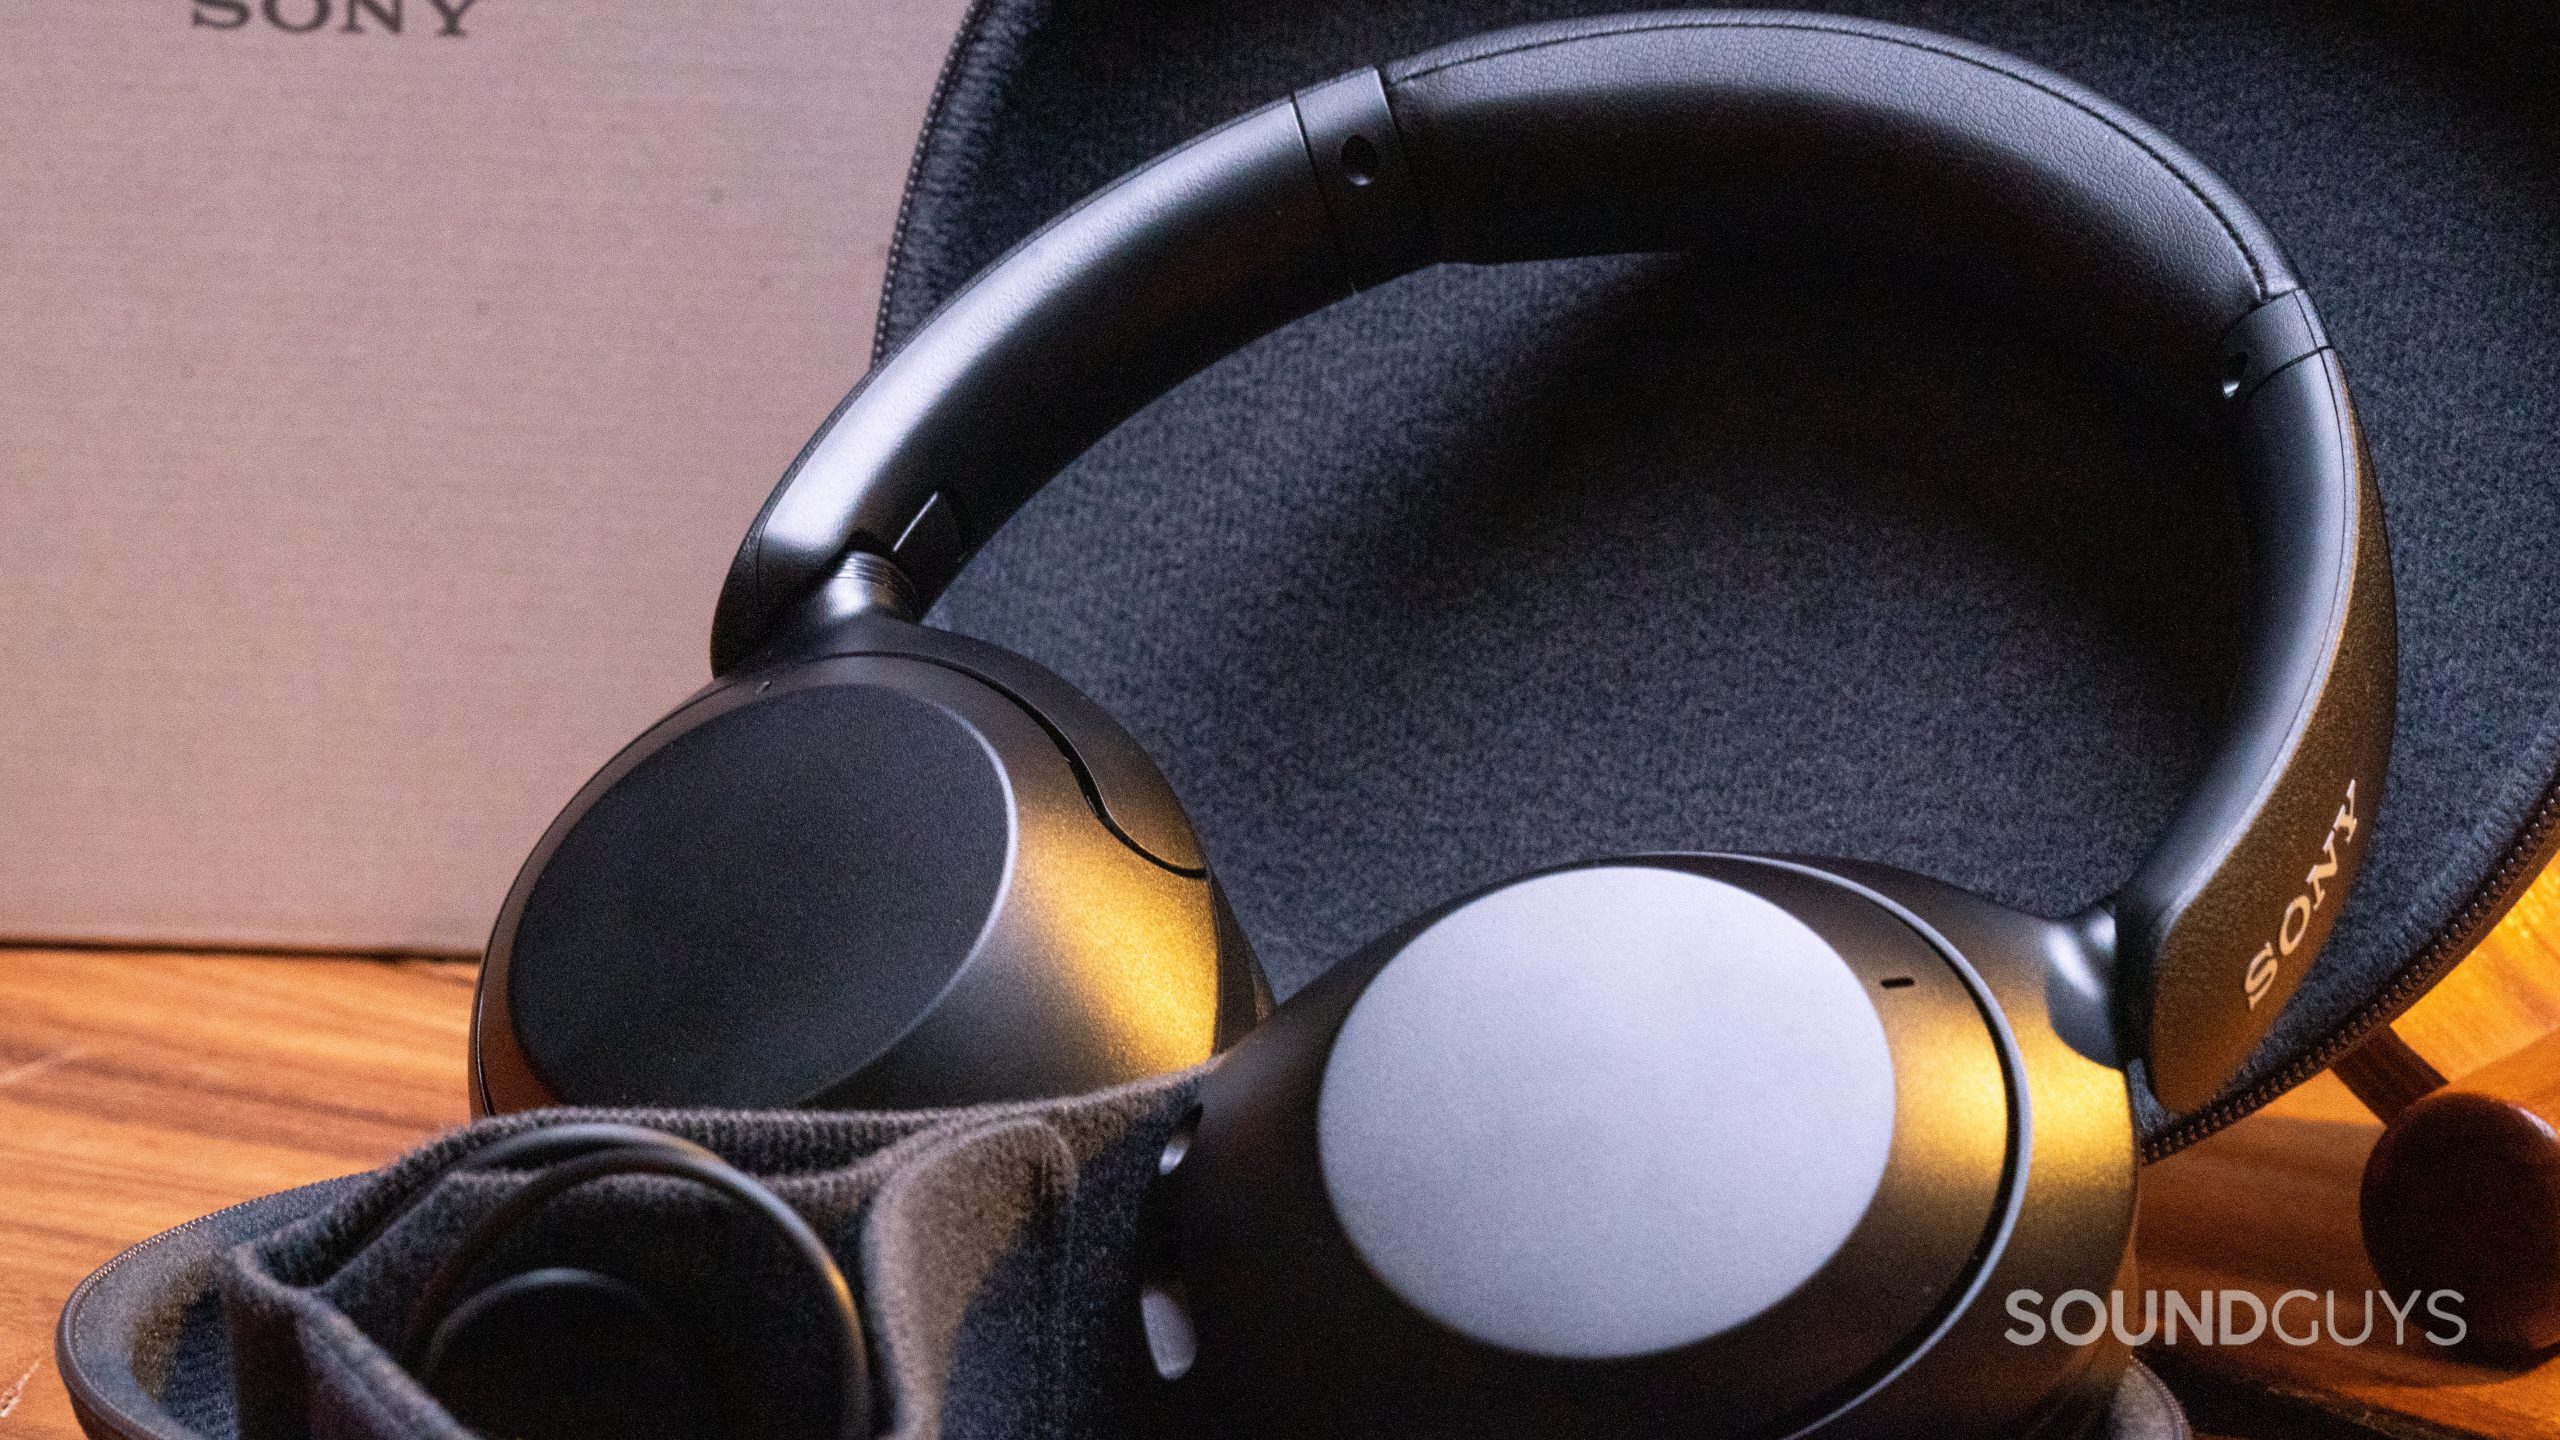 Sony WH-XB910N Wireless Headphones review 